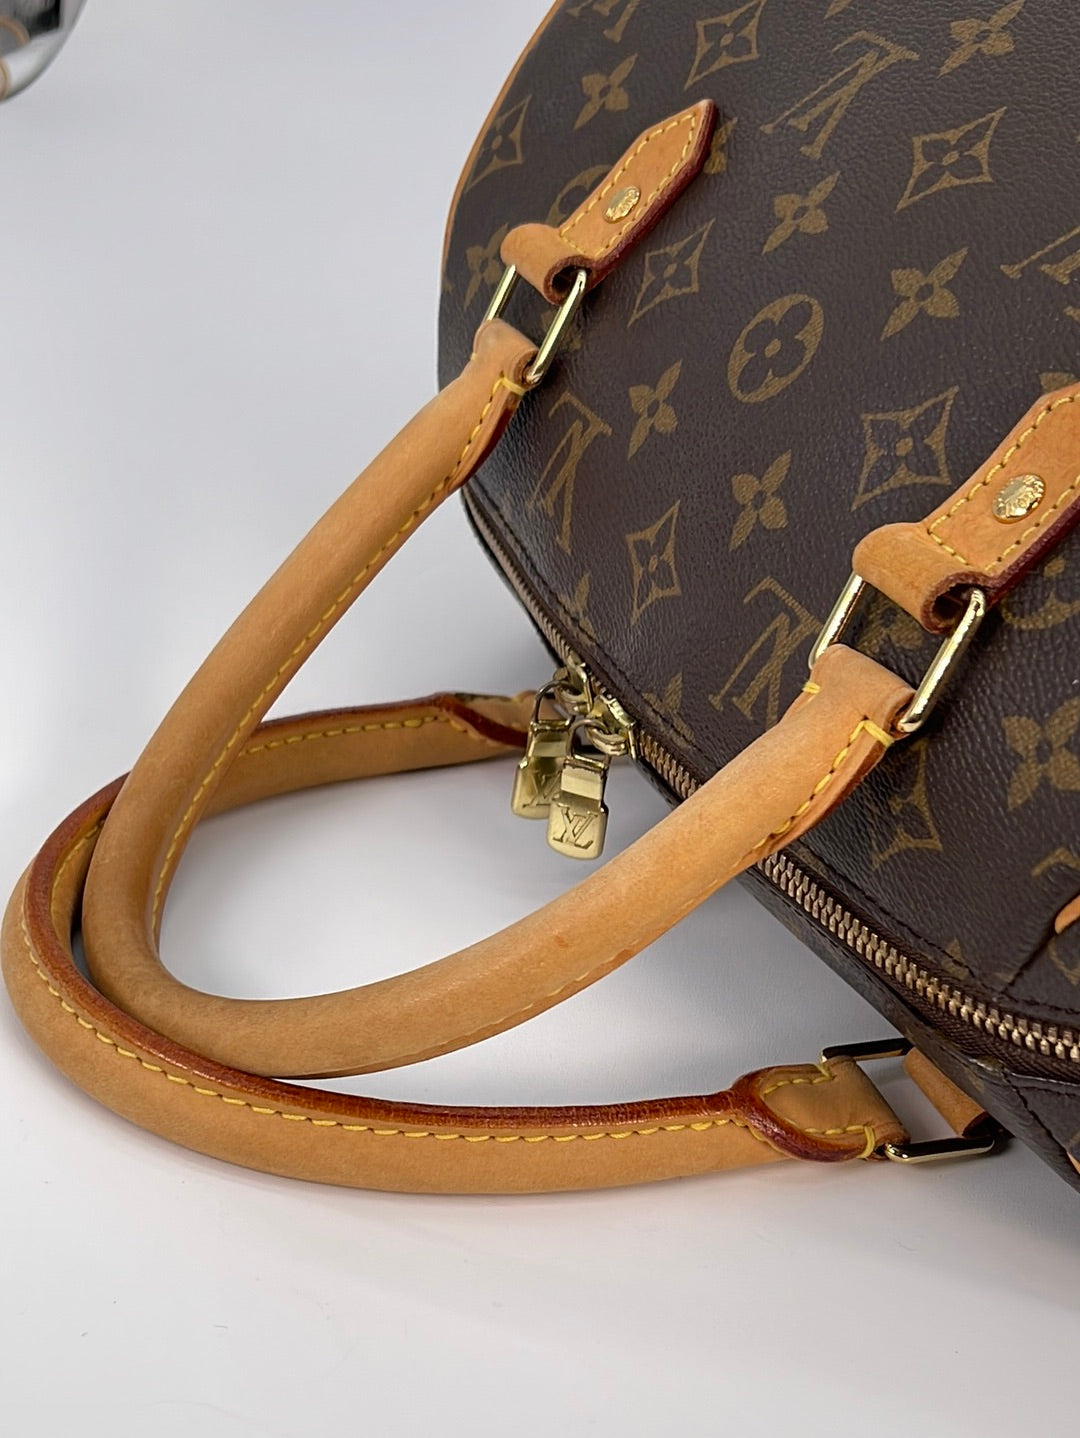 Buy Louis Vuitton monogram LOUIS VUITTON Multipristine Monogram M51162 Tote  Bag Brown / 250817 [Used] from Japan - Buy authentic Plus exclusive items  from Japan